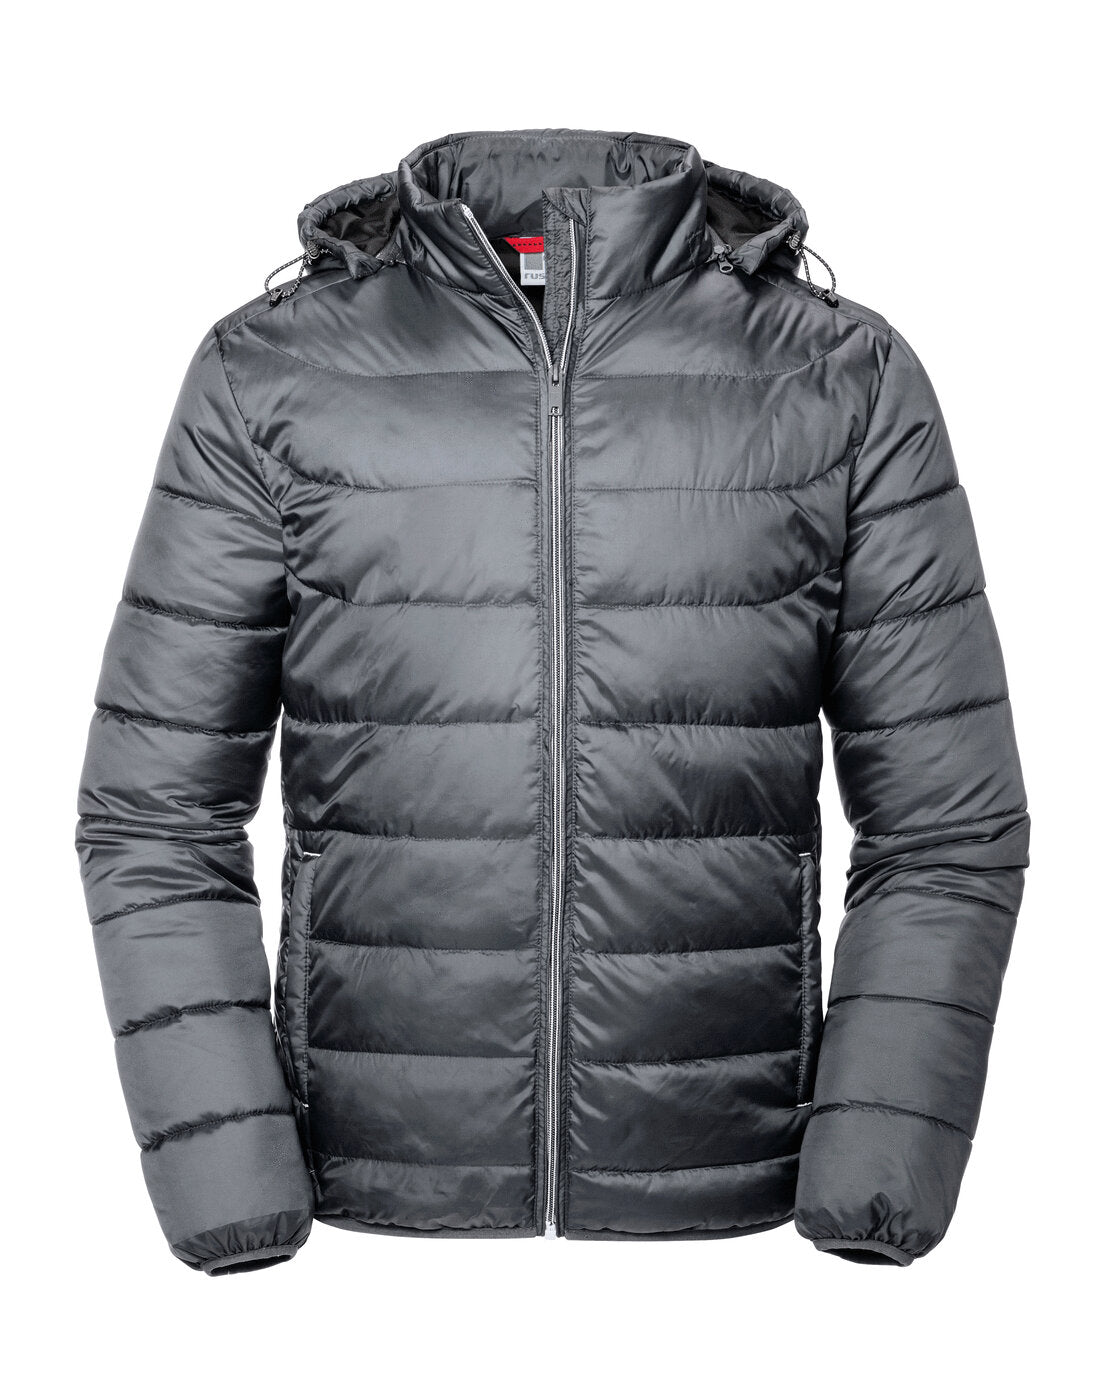 Russell Mens Hooded Nano Jacket